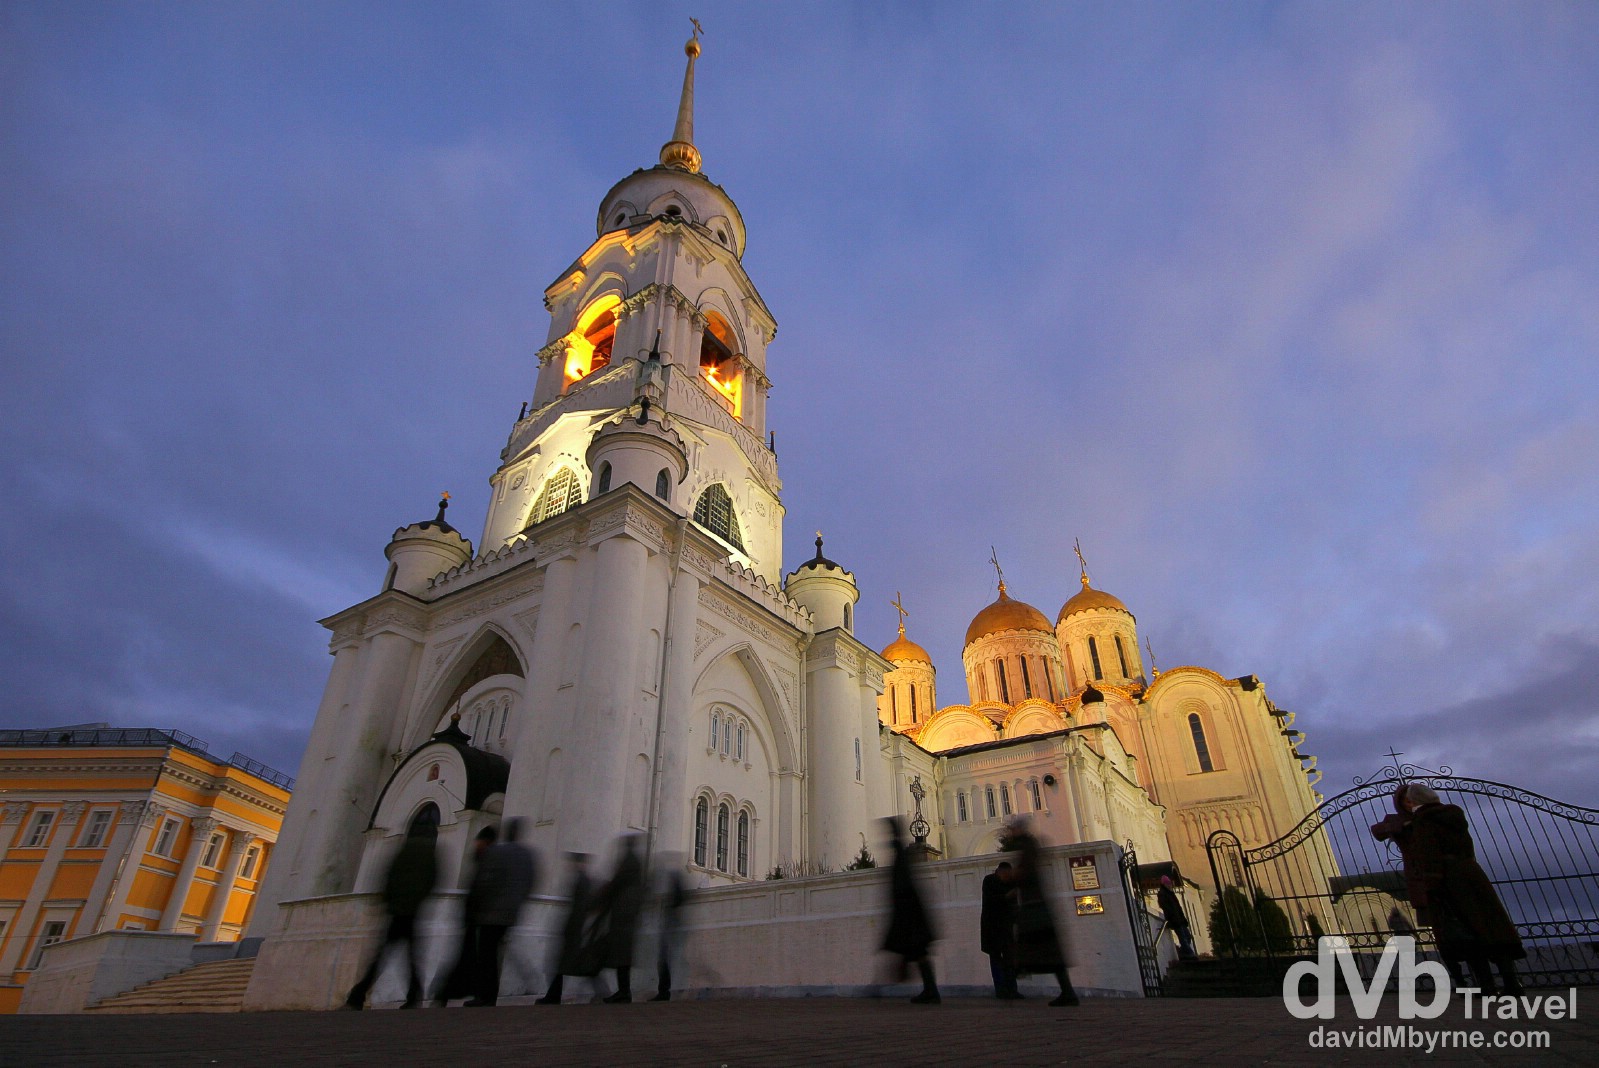 The gleaming white, golden-domed Assumption Cathedral in Vladimir, Russia. November 16th 2012.